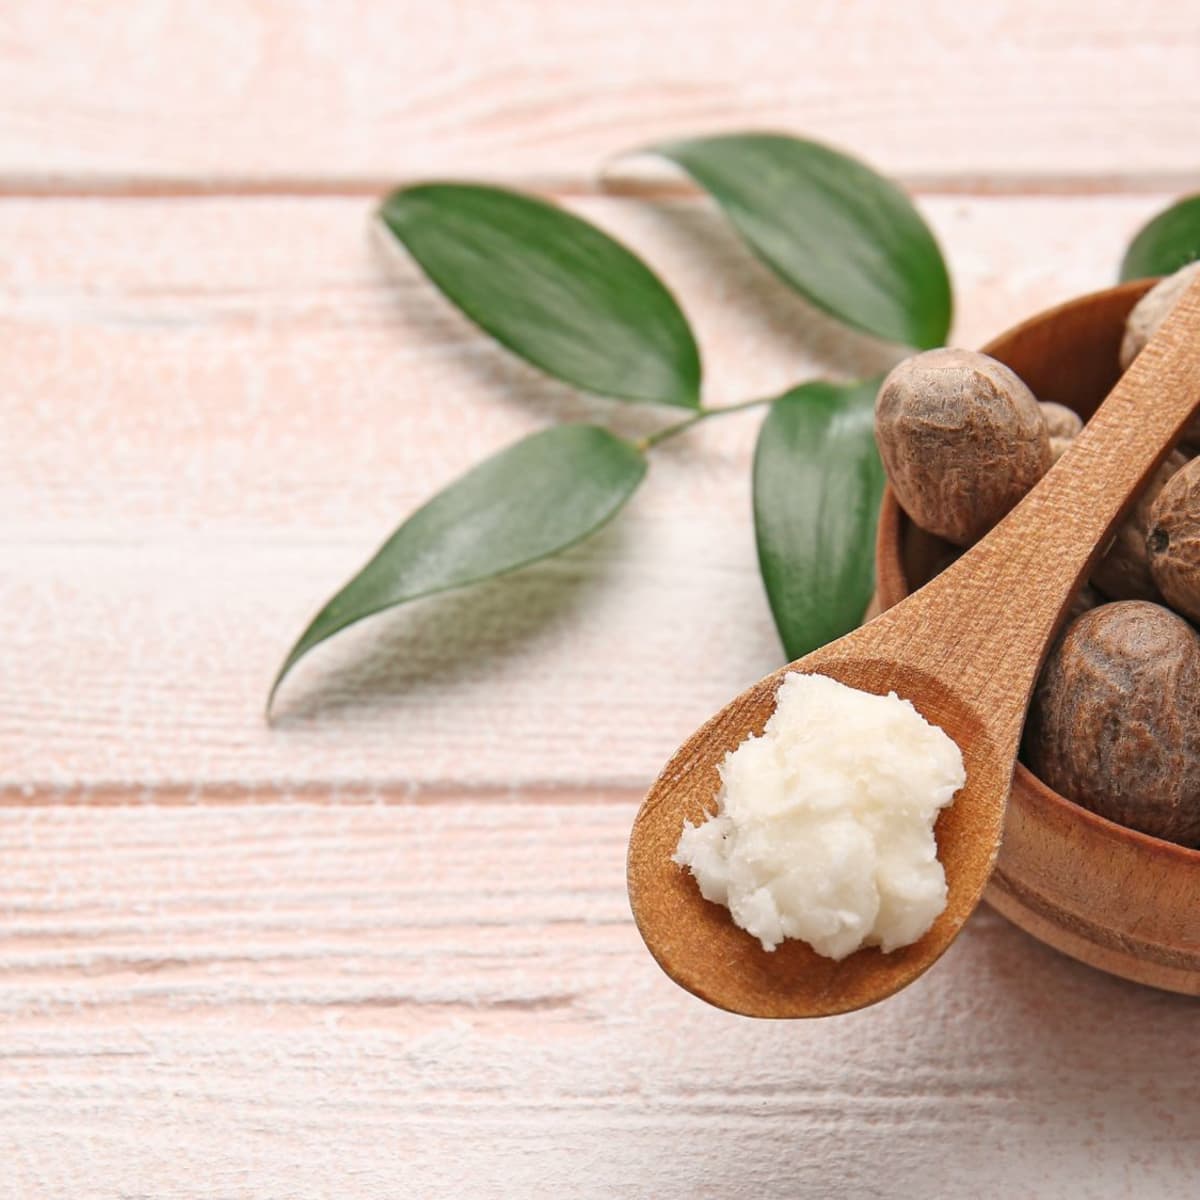 Shea Butter Benefits for Skin and Hair and Facial Moisturizer Recipe image